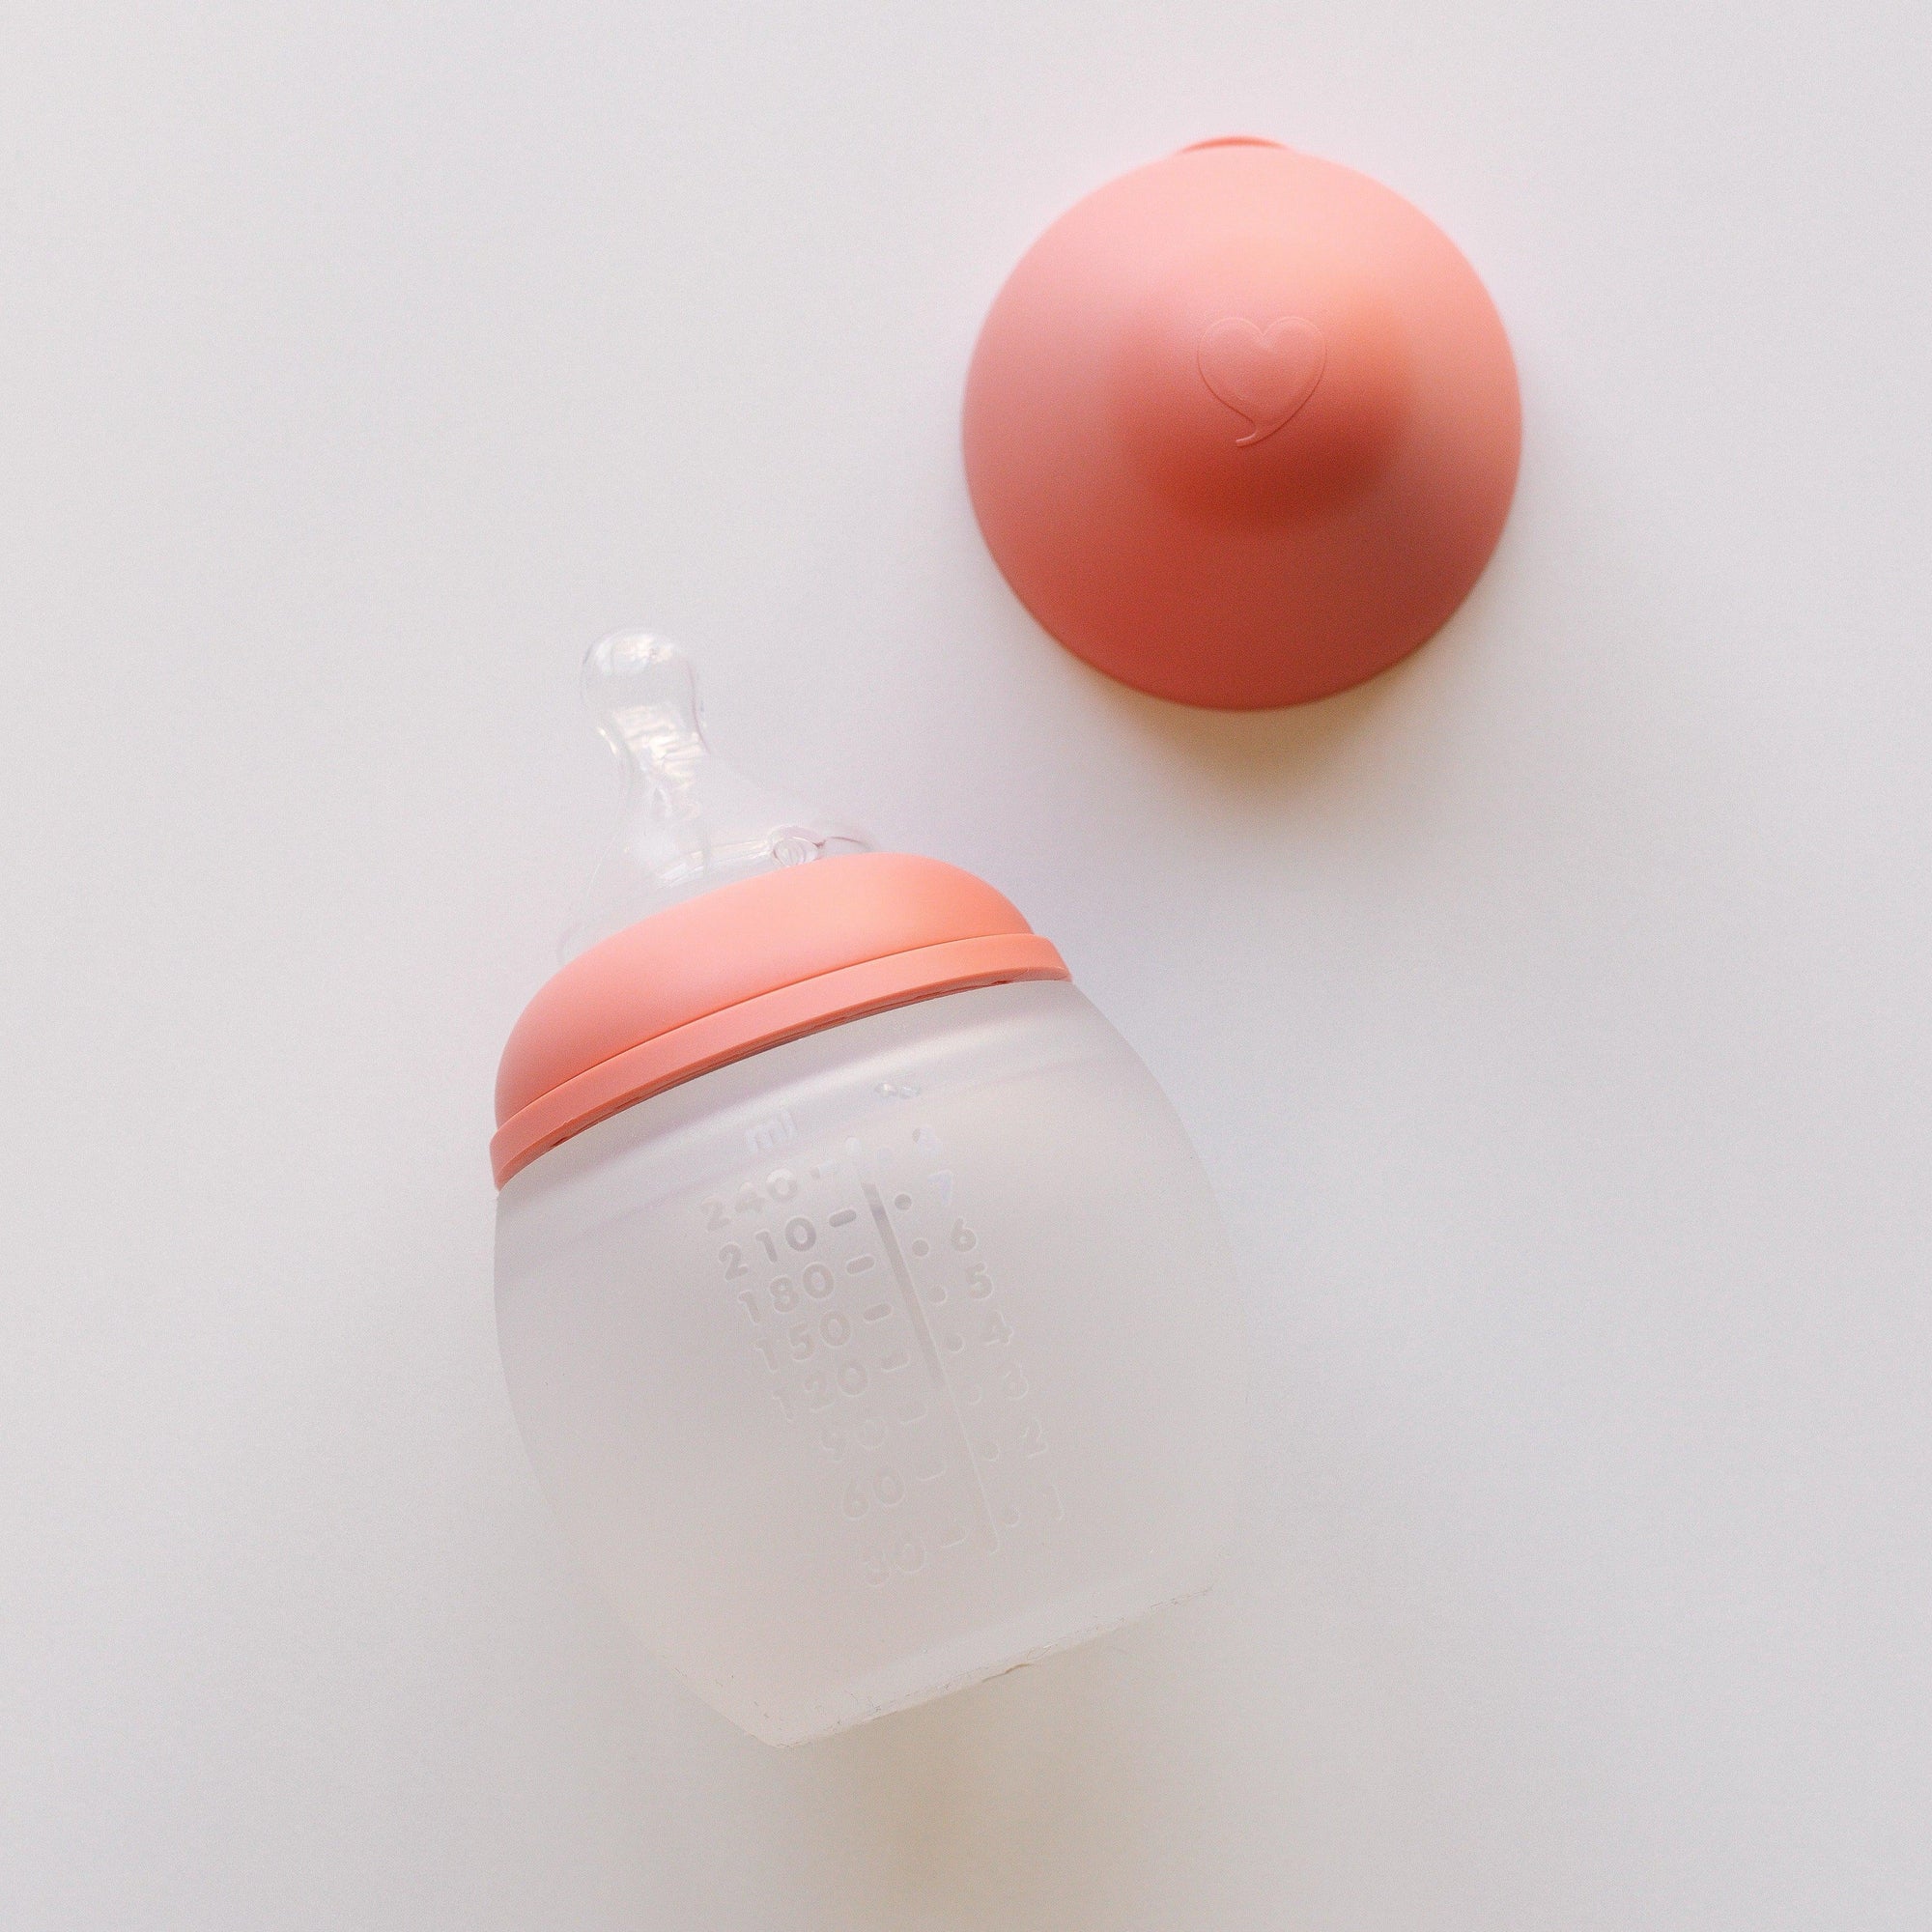 A BibRond summer coral baby bottle by Elhée France laying on a white surface.